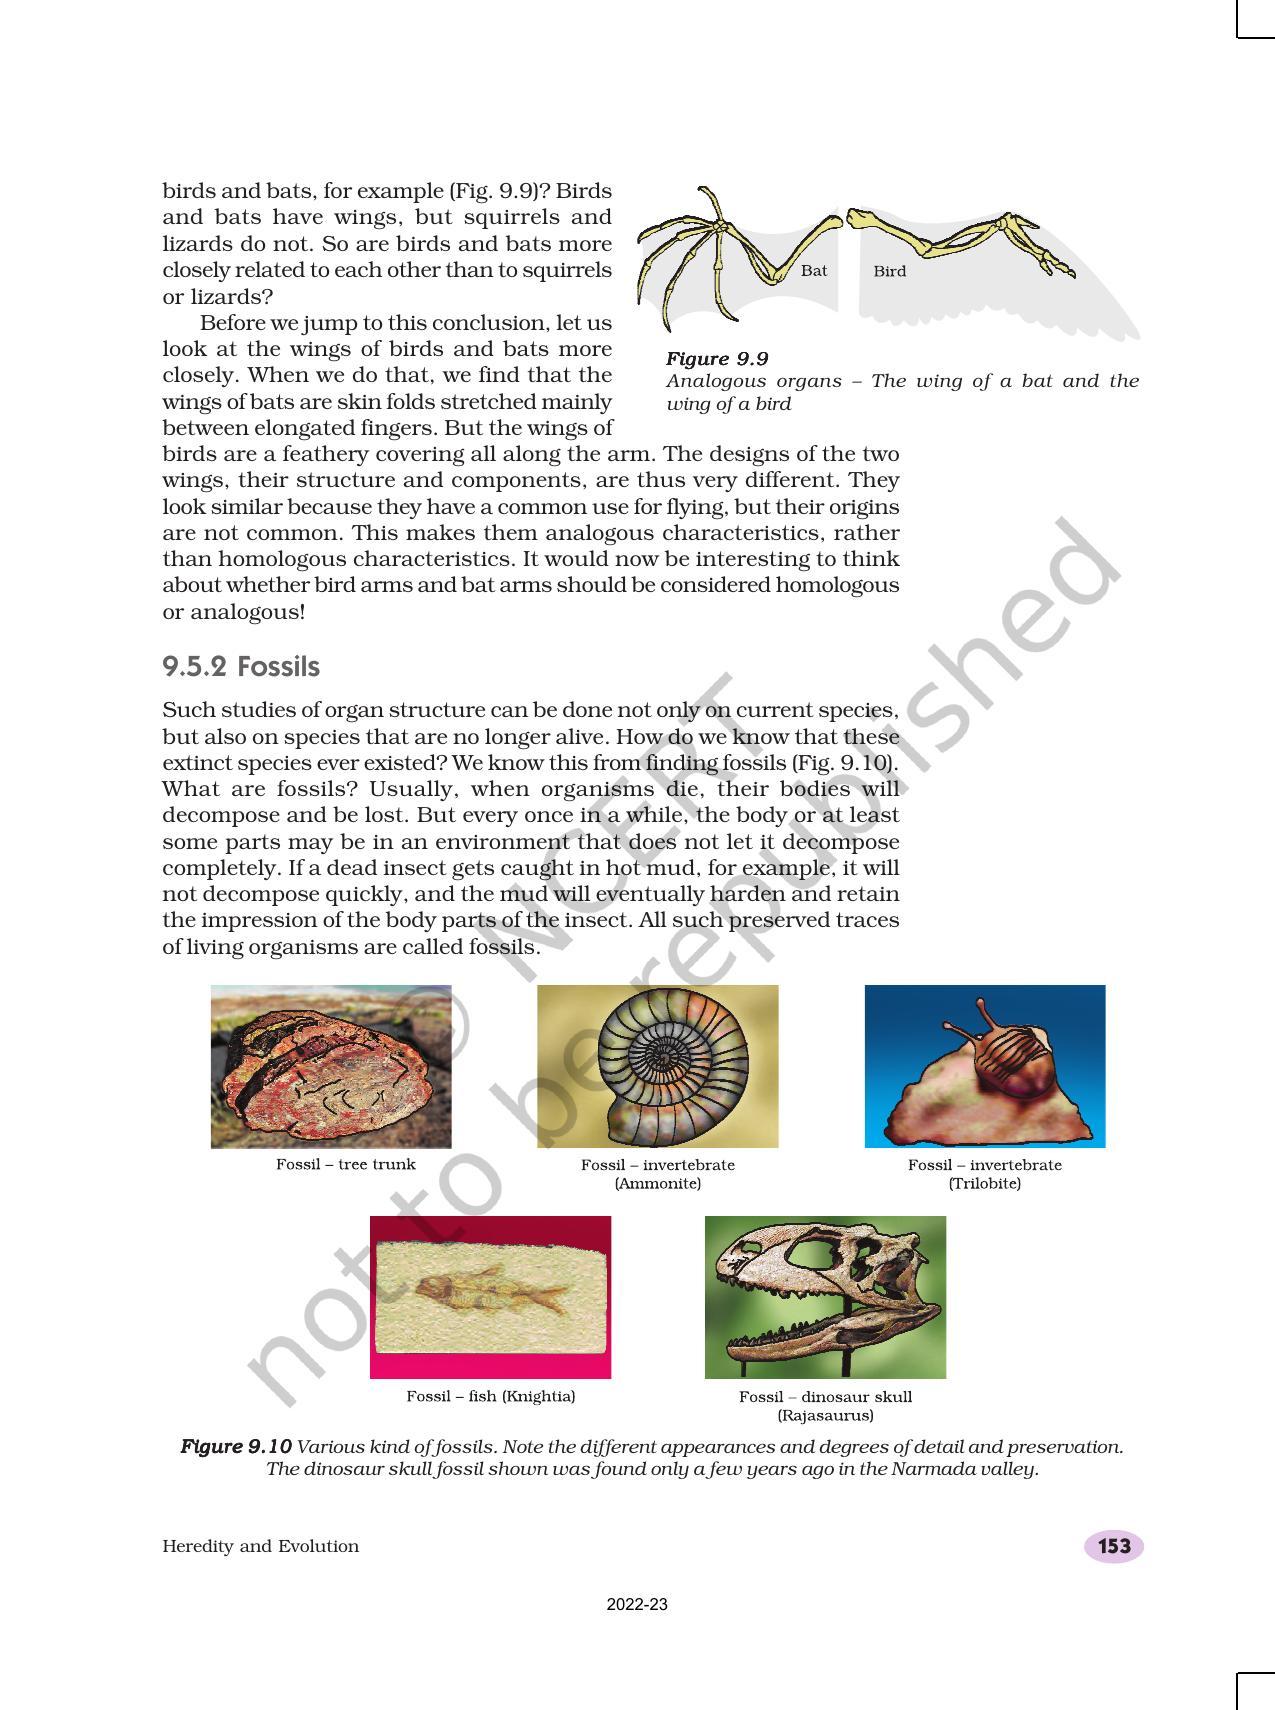 NCERT Book for Class 10 Science Chapter 9 Heredity and Evolution - Page 12